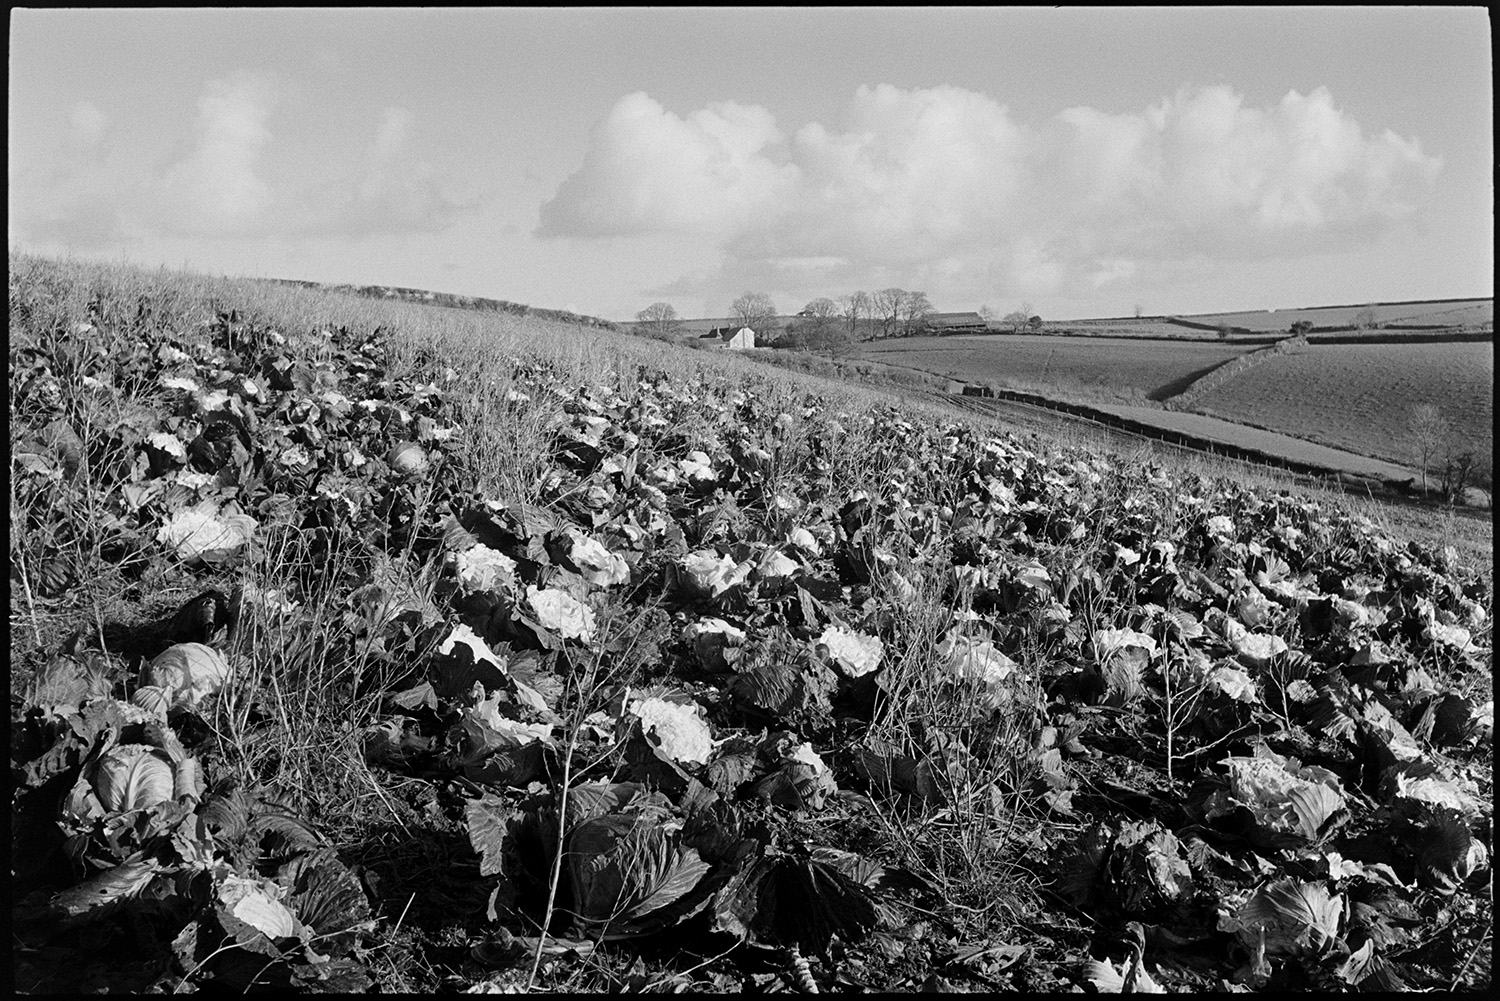 Field of cabbages, flatpoles?
[Cabbages or flatpoles in a field at South Harepath, Beaford, with a view of surrounding fields and hedgerows and farm buildings in the background. Cloud formations can also be seen in the sky.]